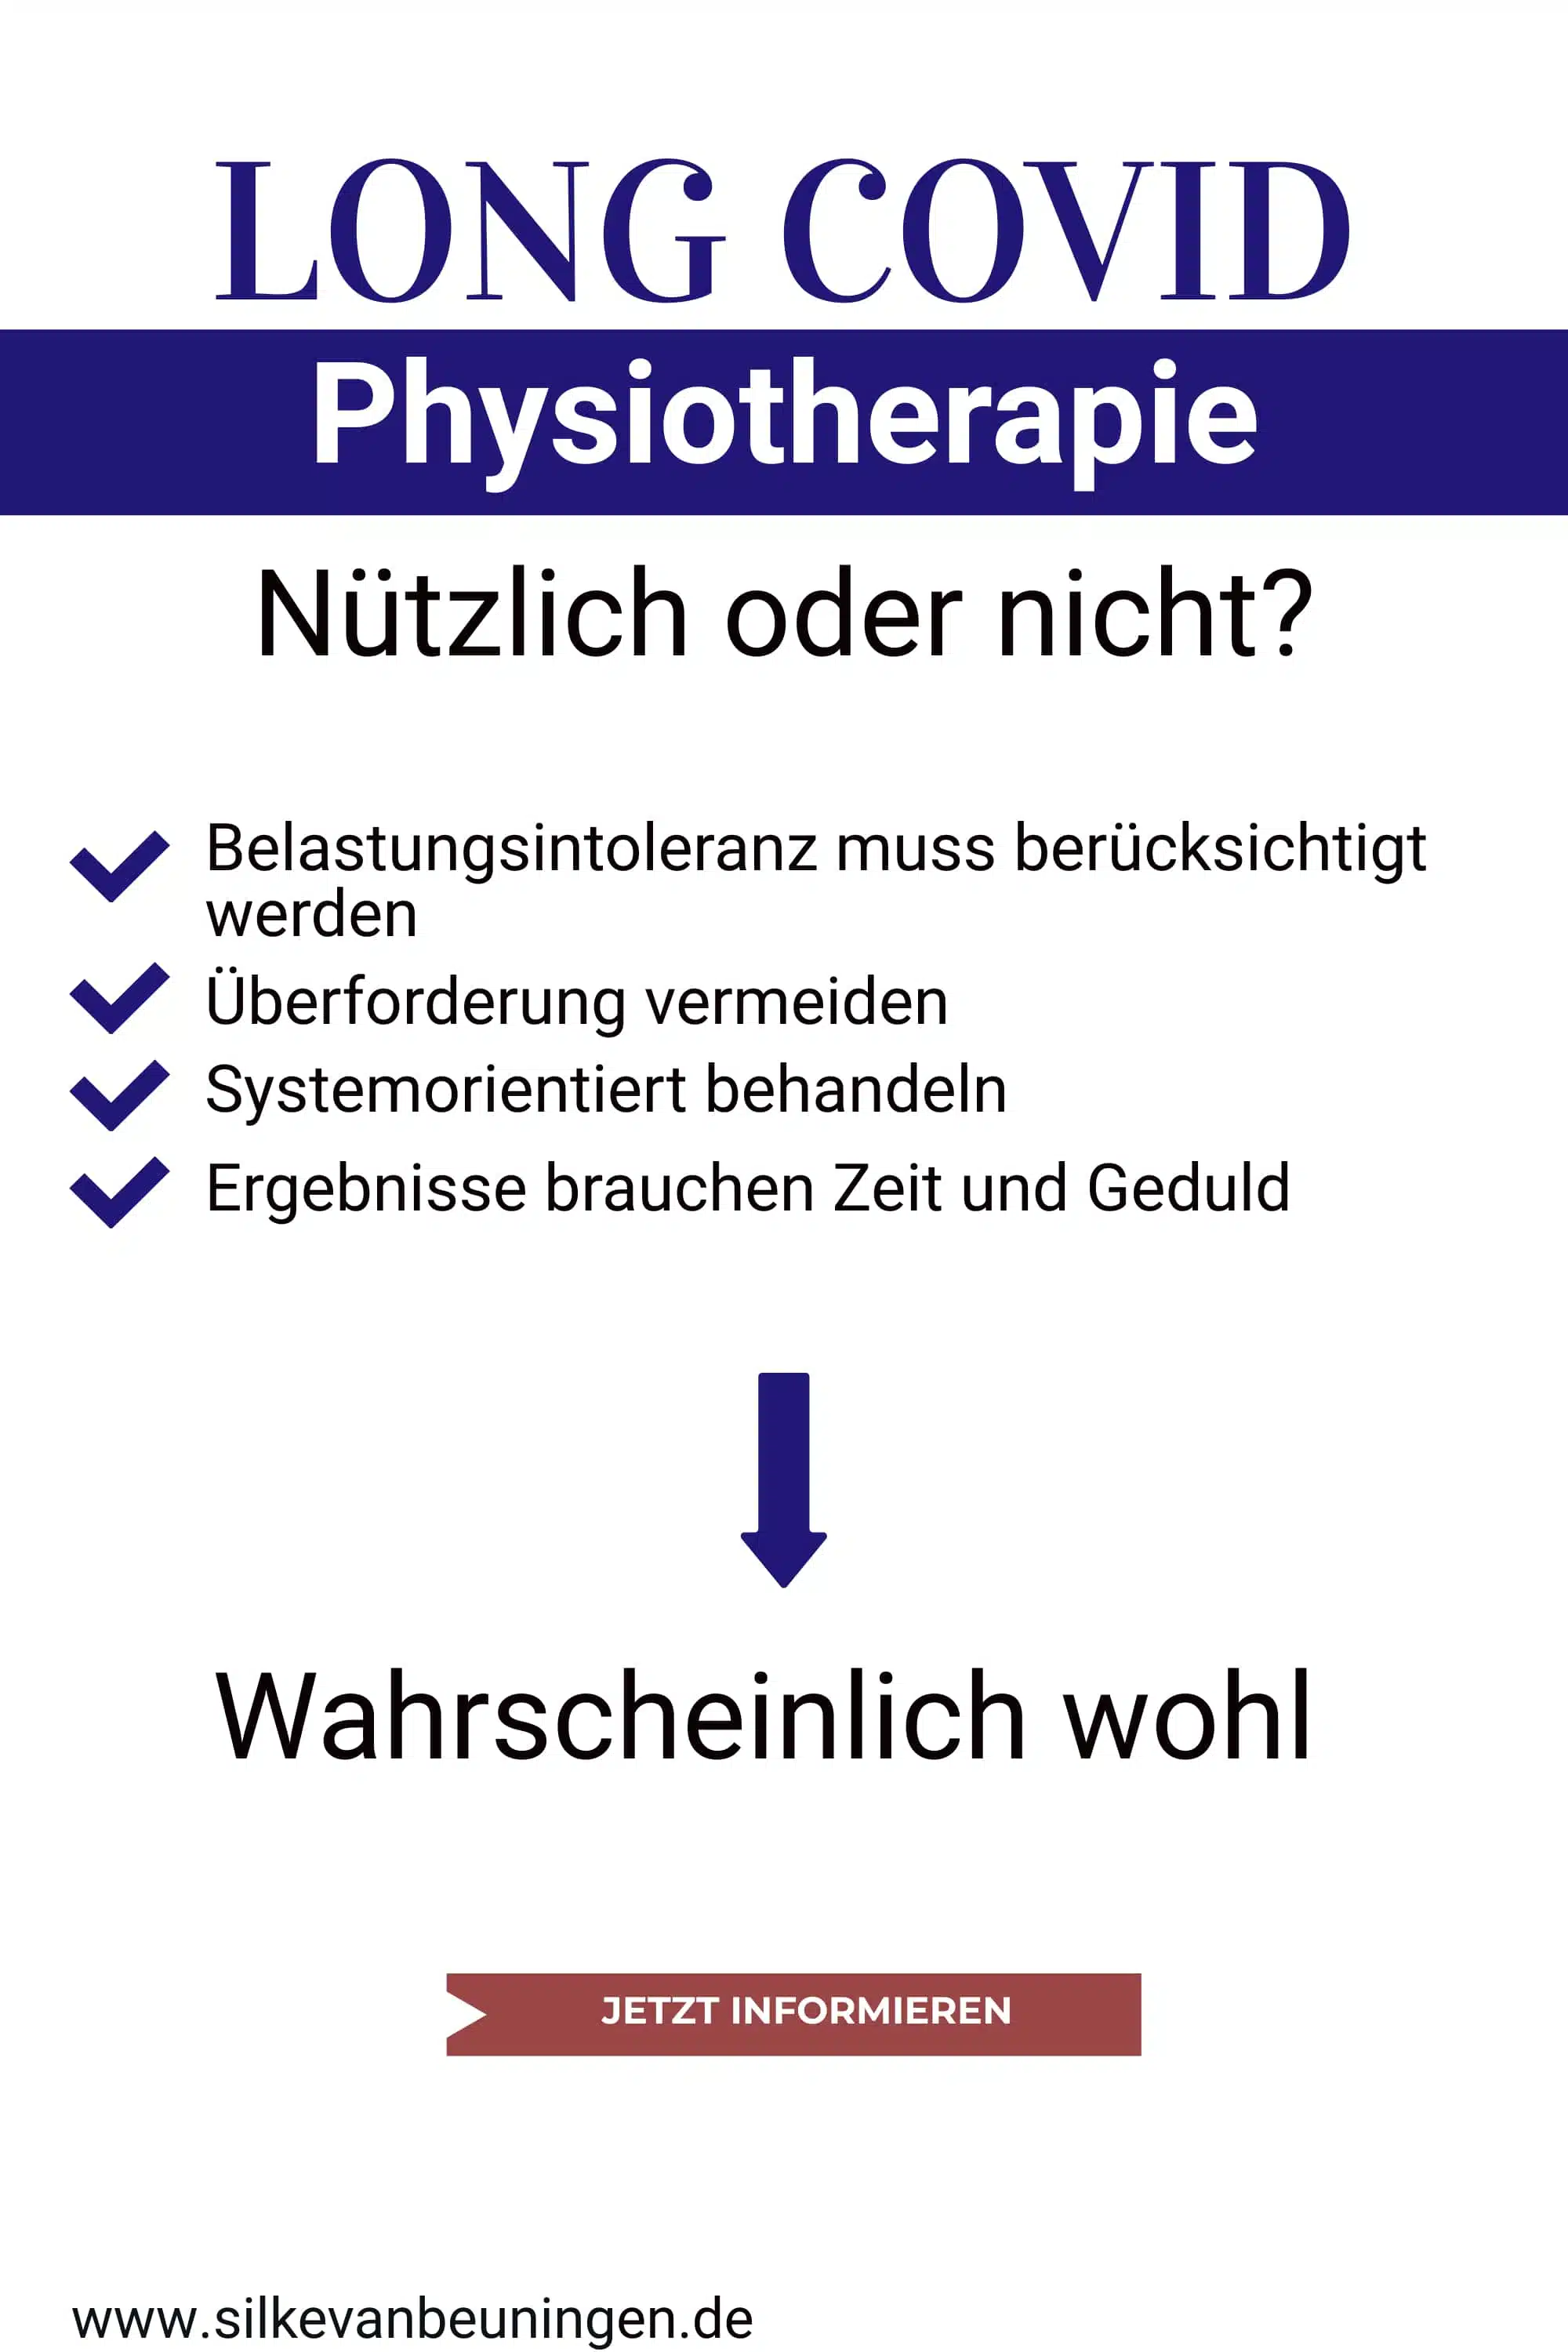 Long Covid Physiotherapie